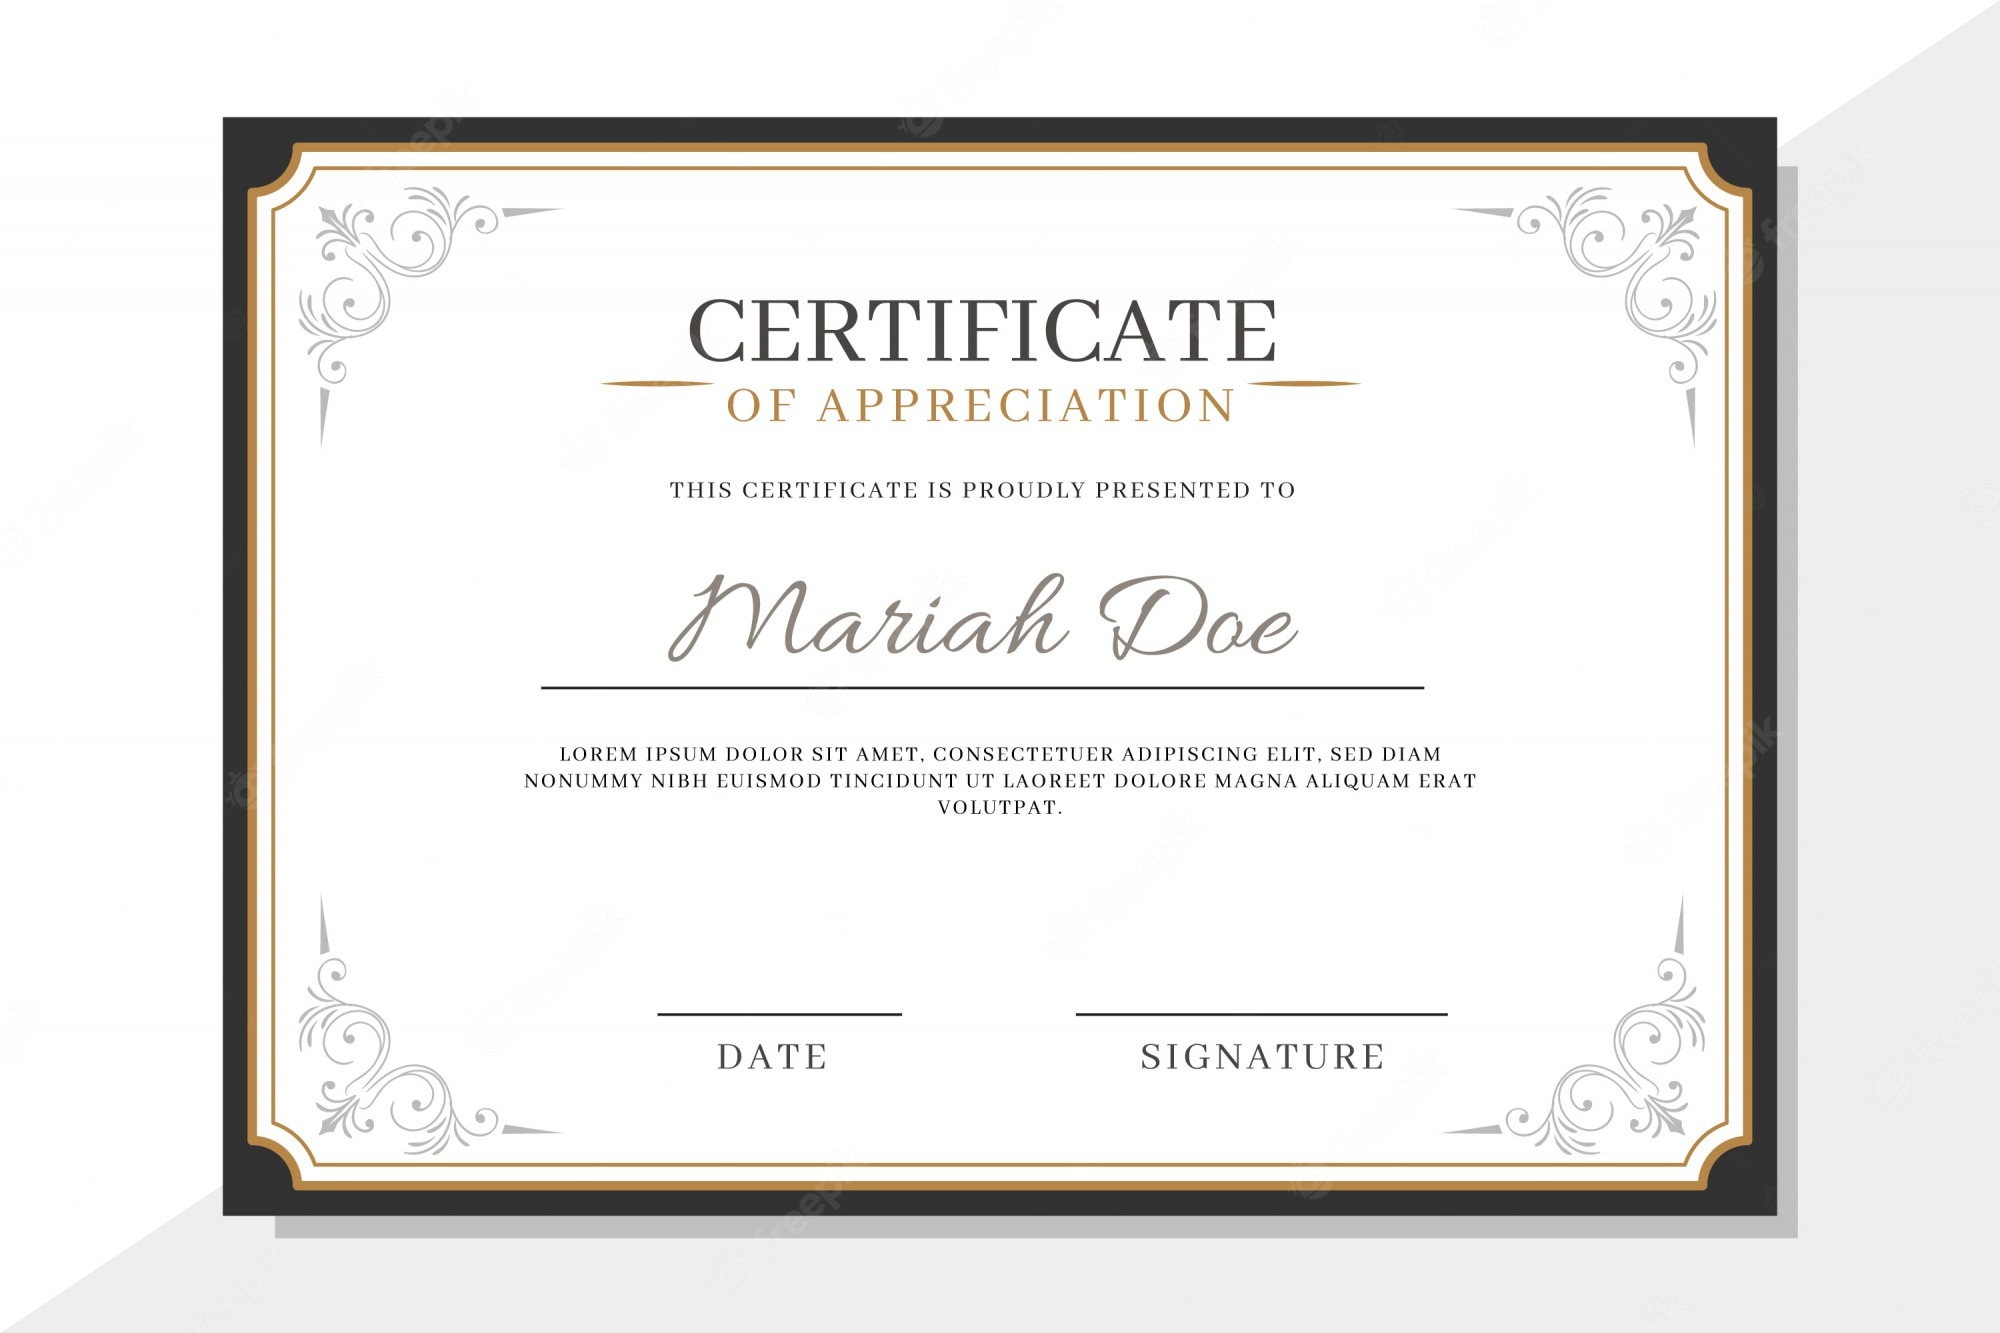 Award certificate Images  Free Vectors, Stock Photos & PSD Inside Pageant Certificate Template